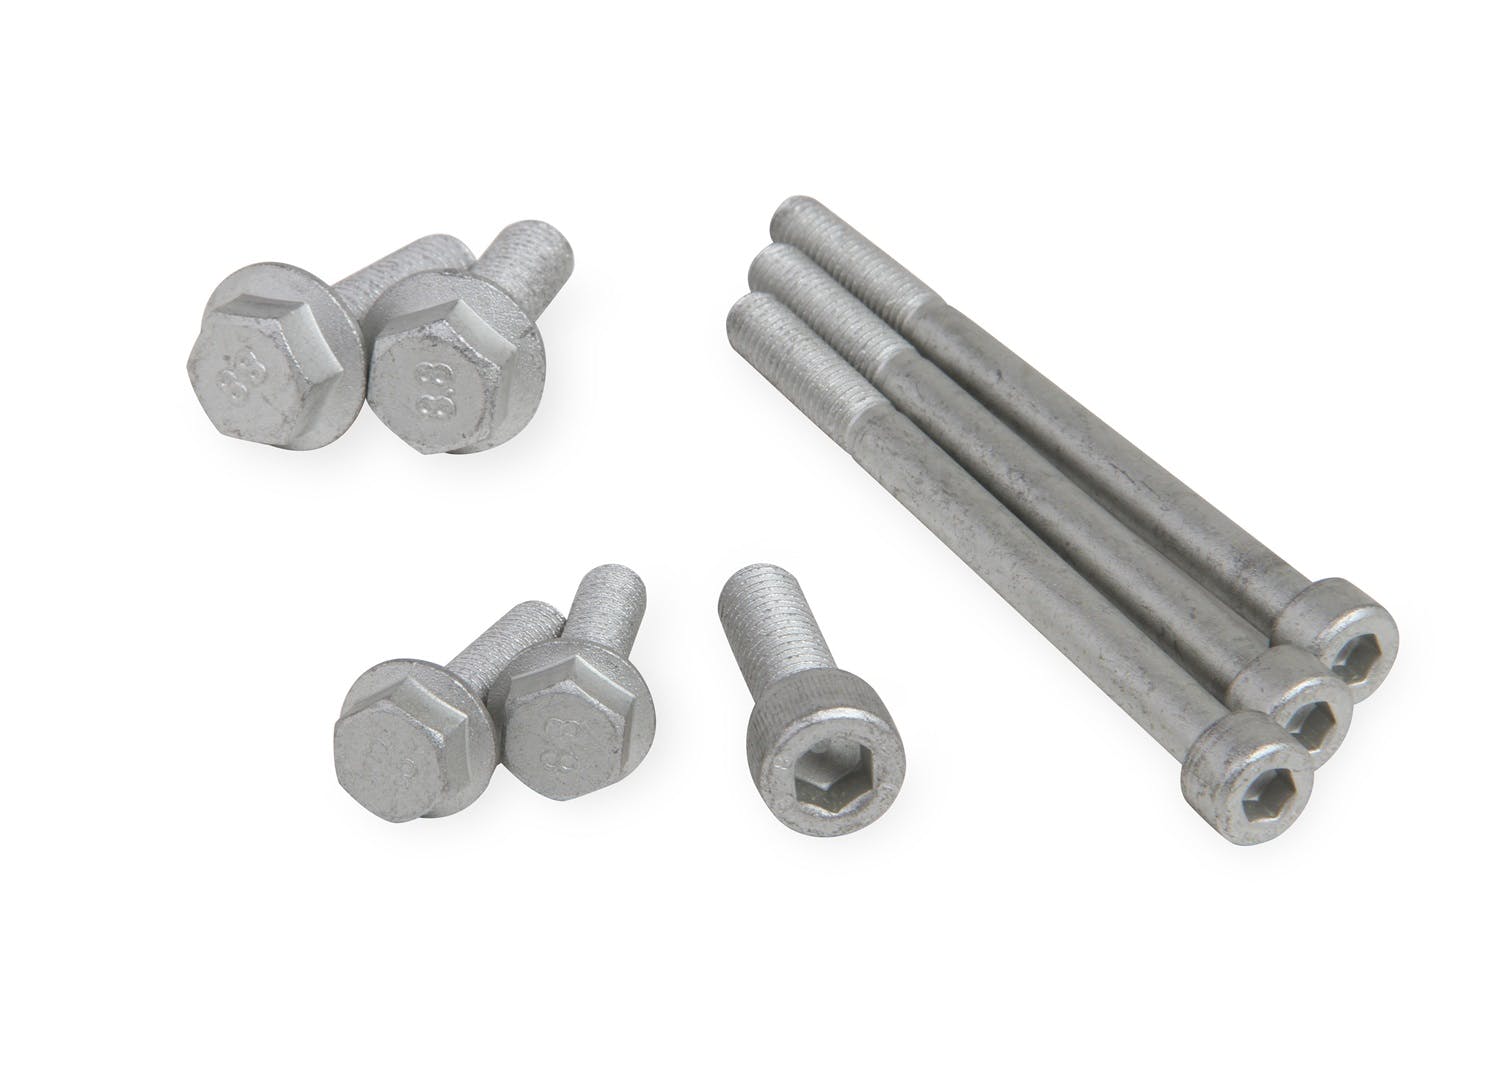 Holley 97-172 REPLACEMENT HARDWARE KIT FOR 20-133